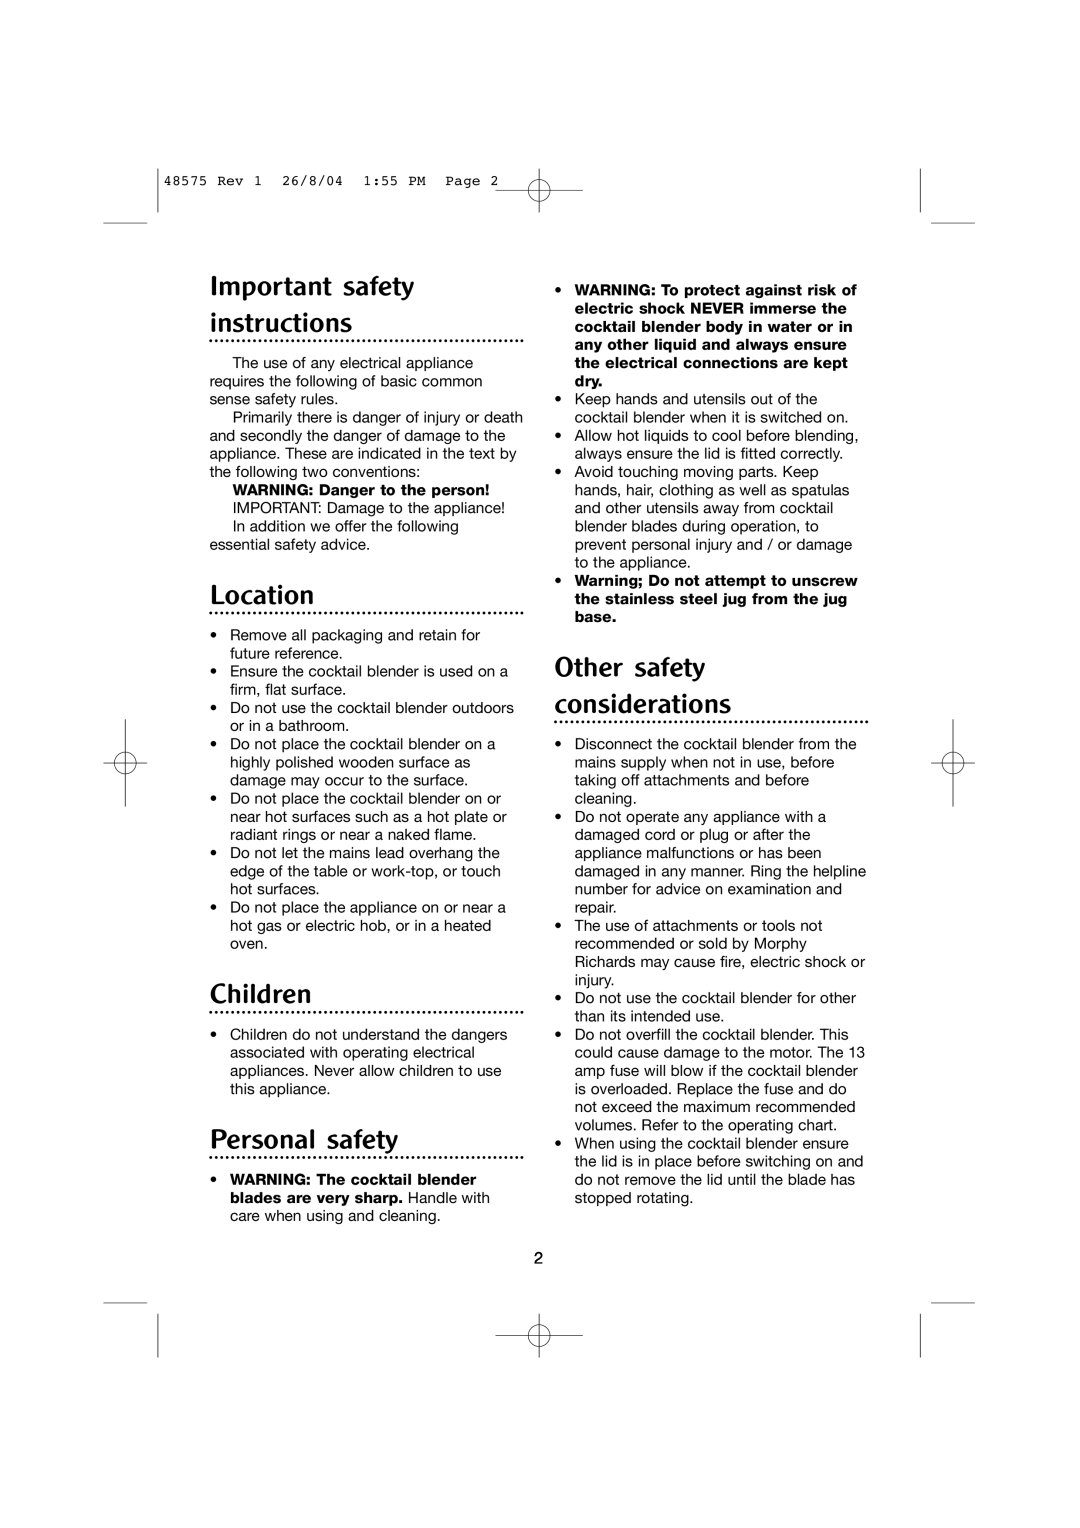 Morphy Richards Cocktail blender manual Important safety instructions, Location, Children, Personal safety 